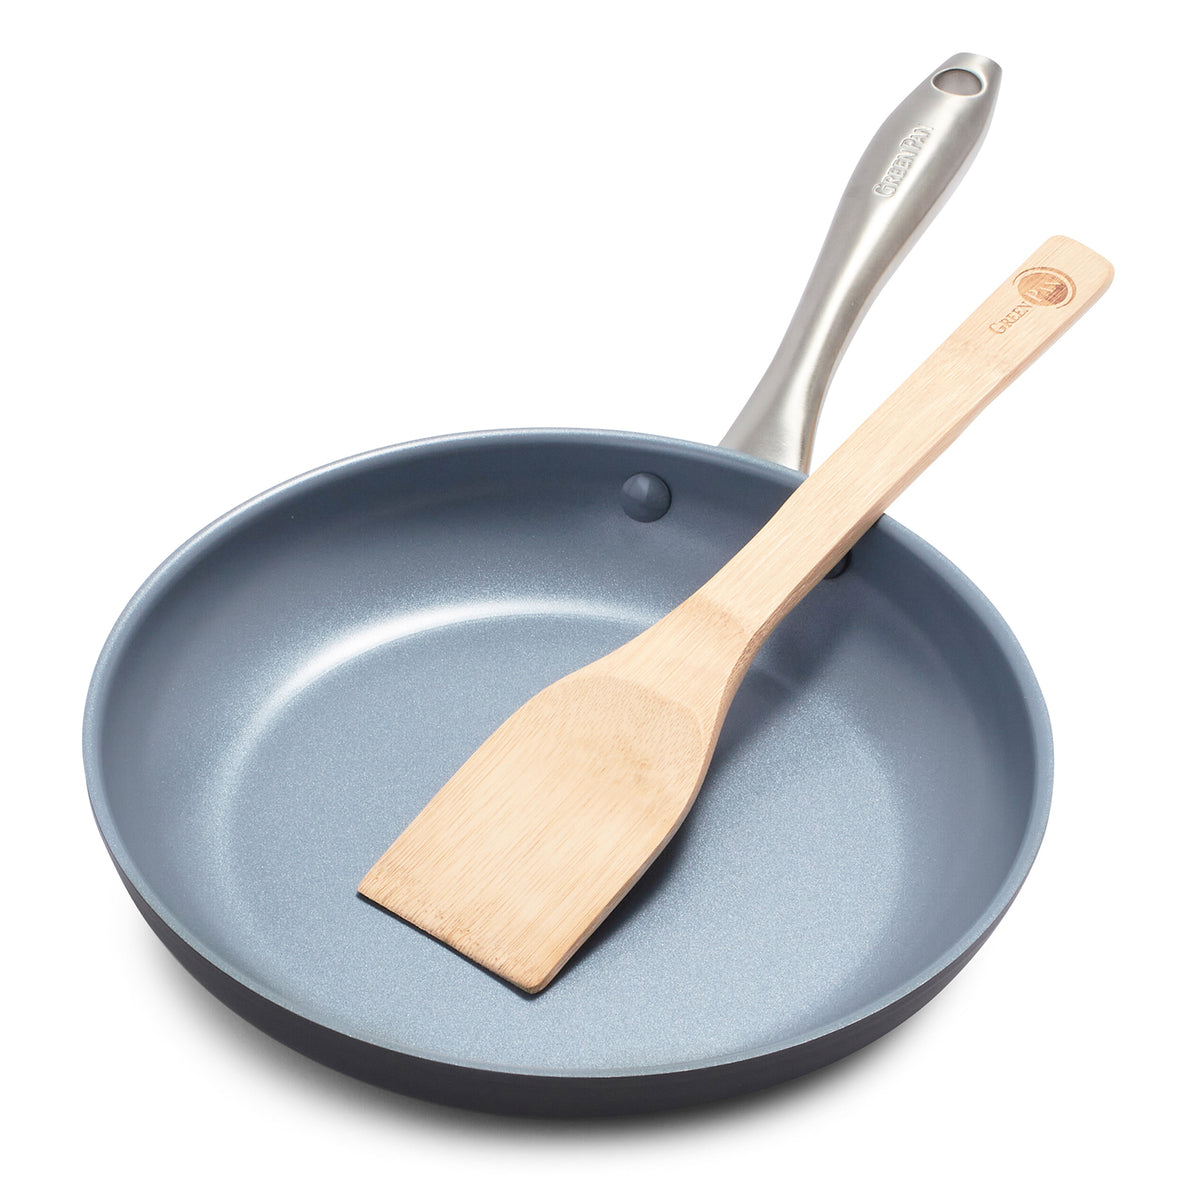 Why Are Ceramic Nonstick Pans the Best Nonstick Pans?